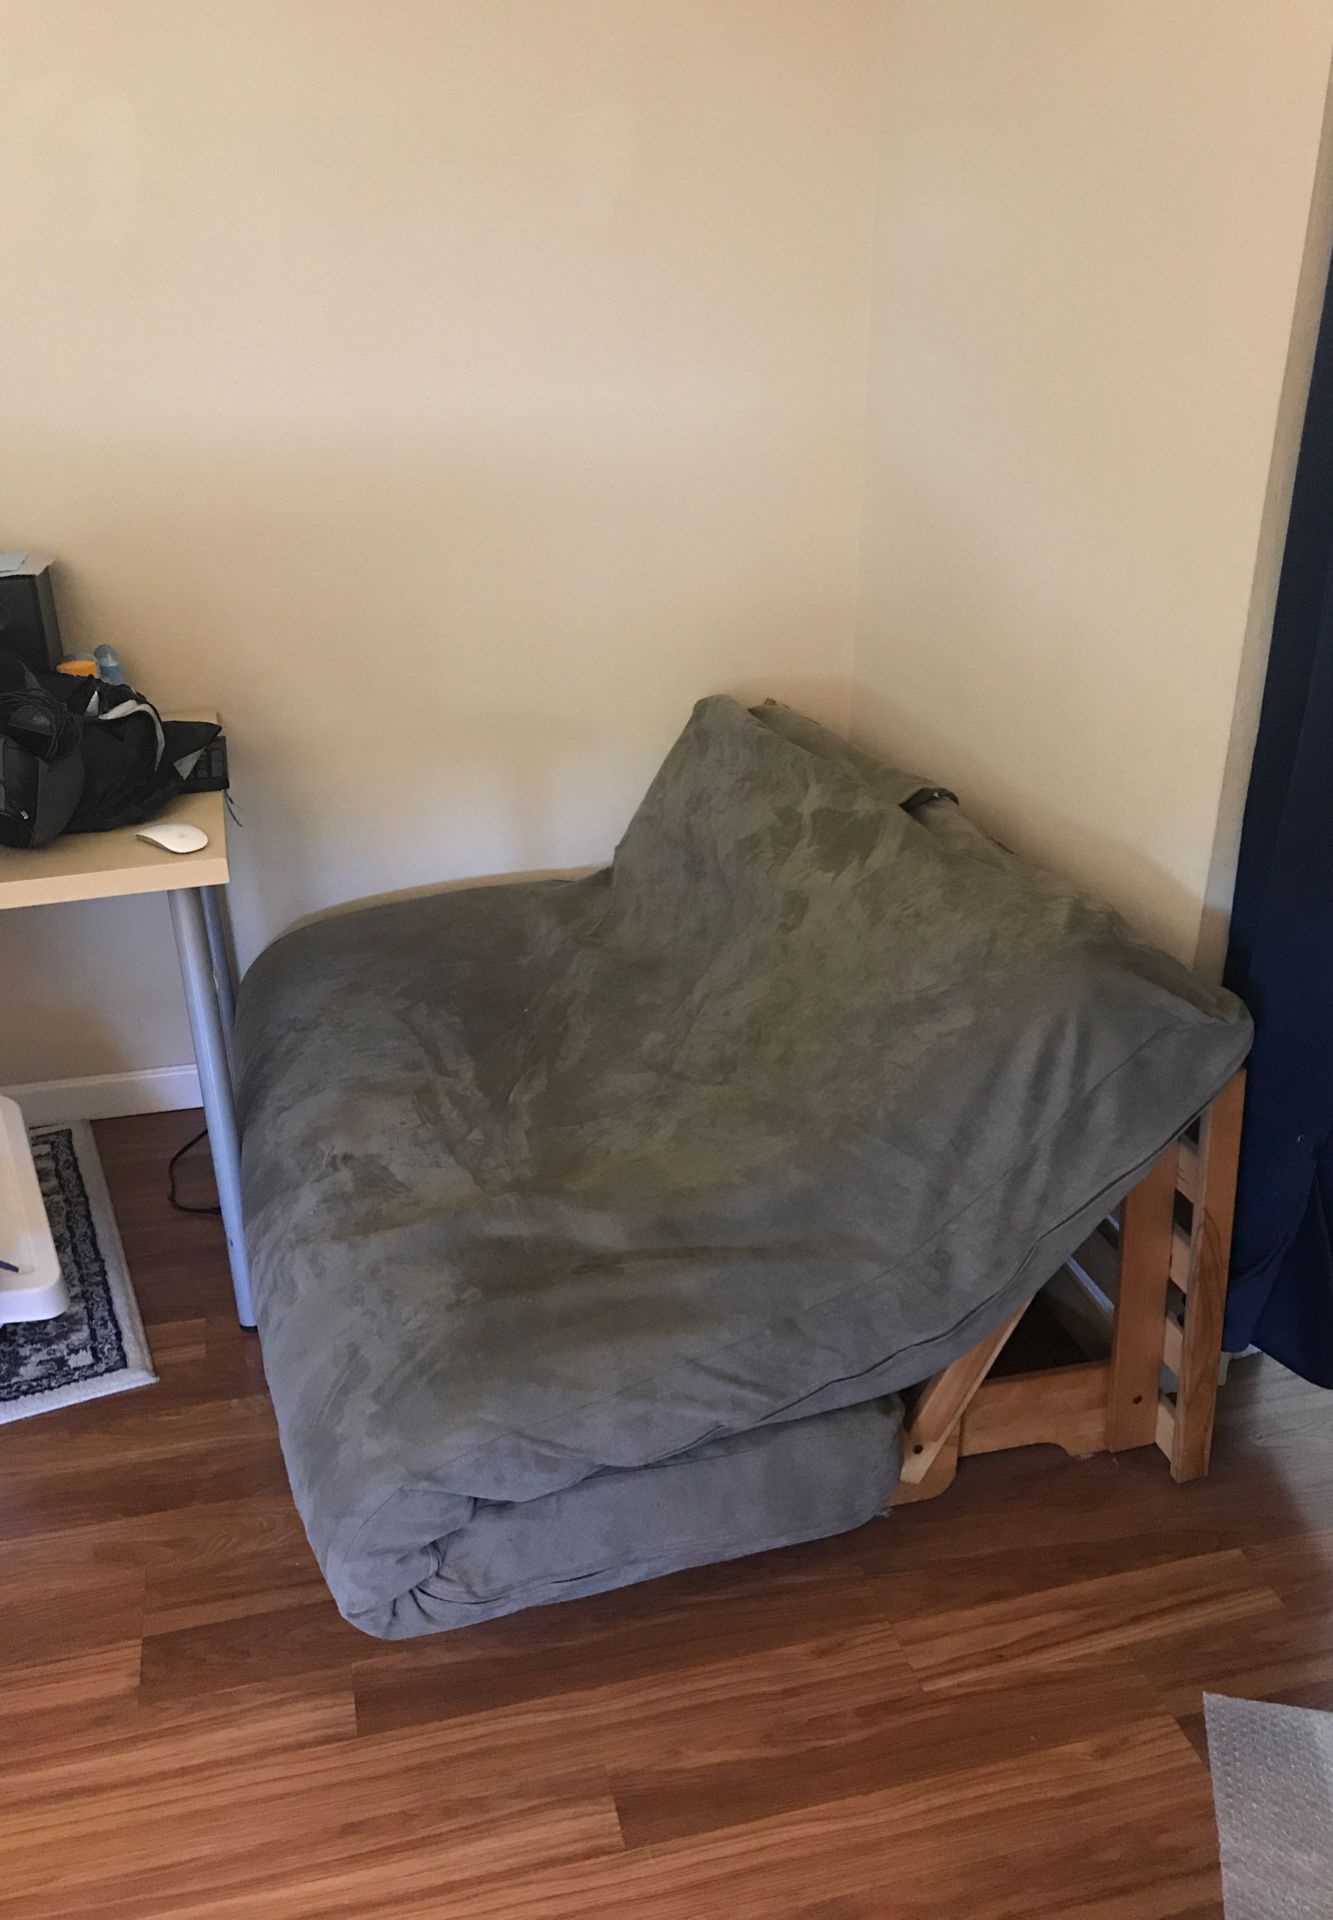 Free futon sofa bed (available if post is up)